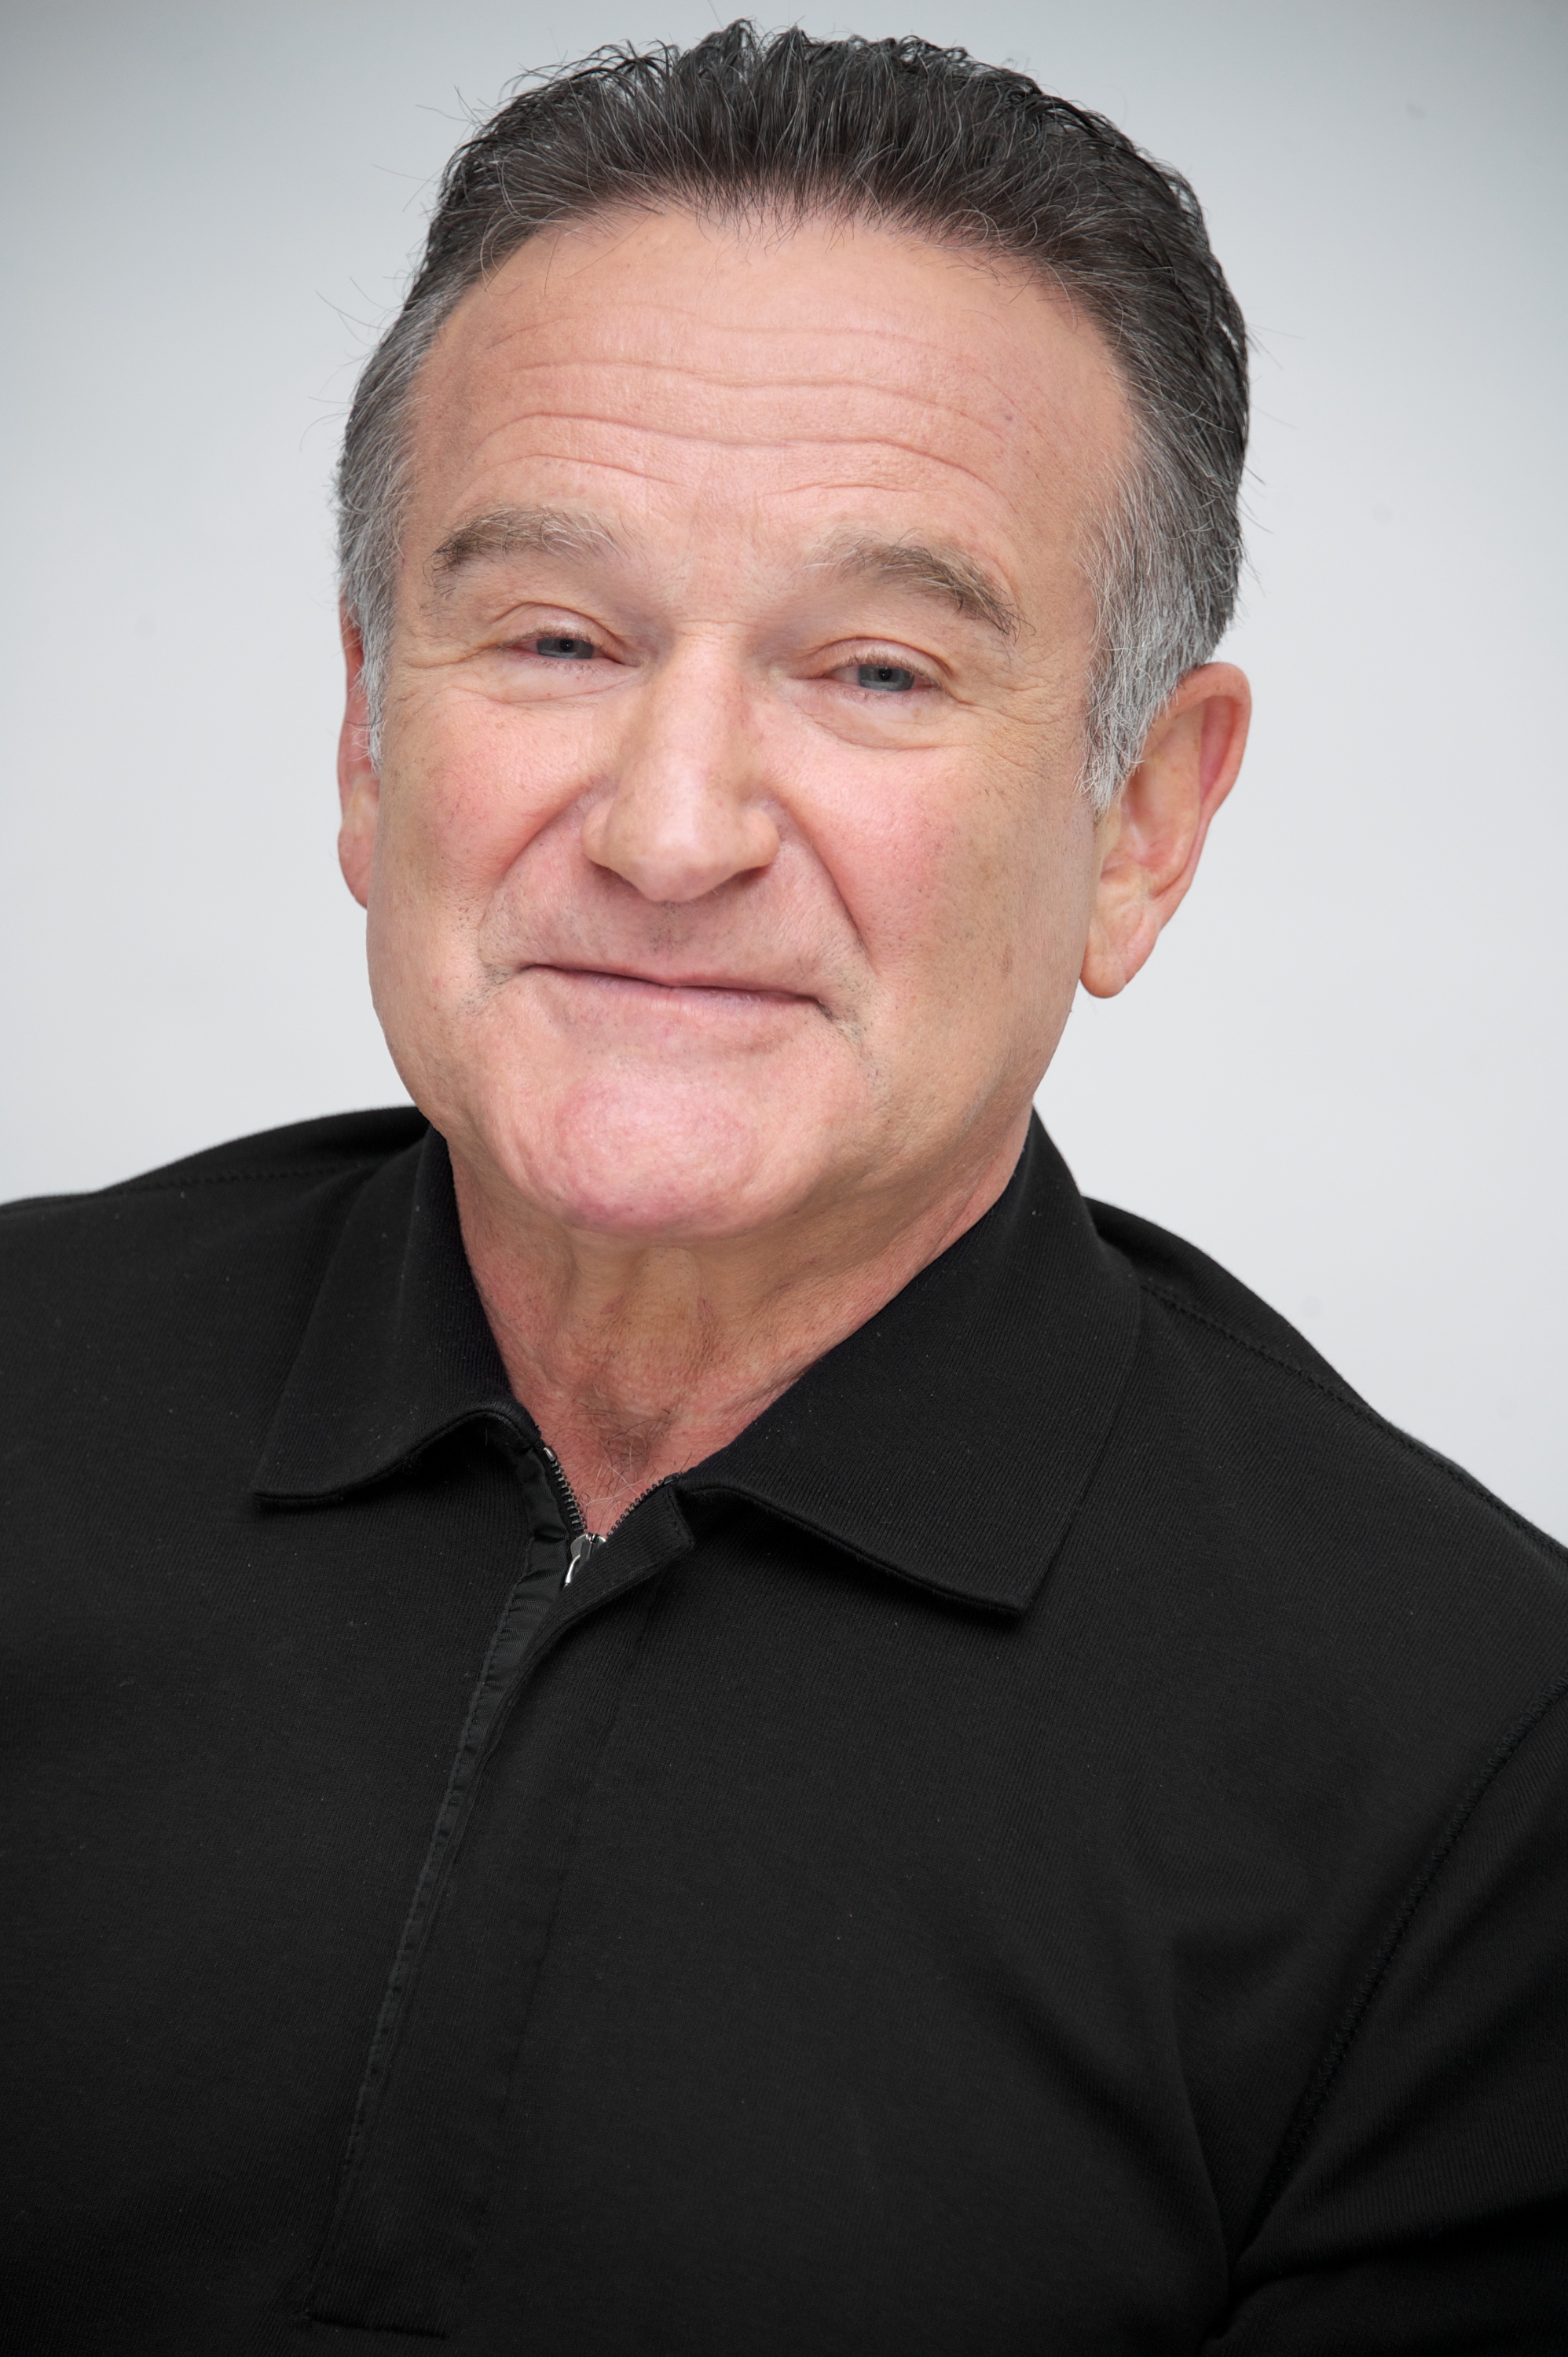 Robin Williams at "The Crazy Ones" Press Conference at the Four Seasons Hotel on October 8, 2013 in Beverly Hills, California. (Vera Anderson—Getty Images)